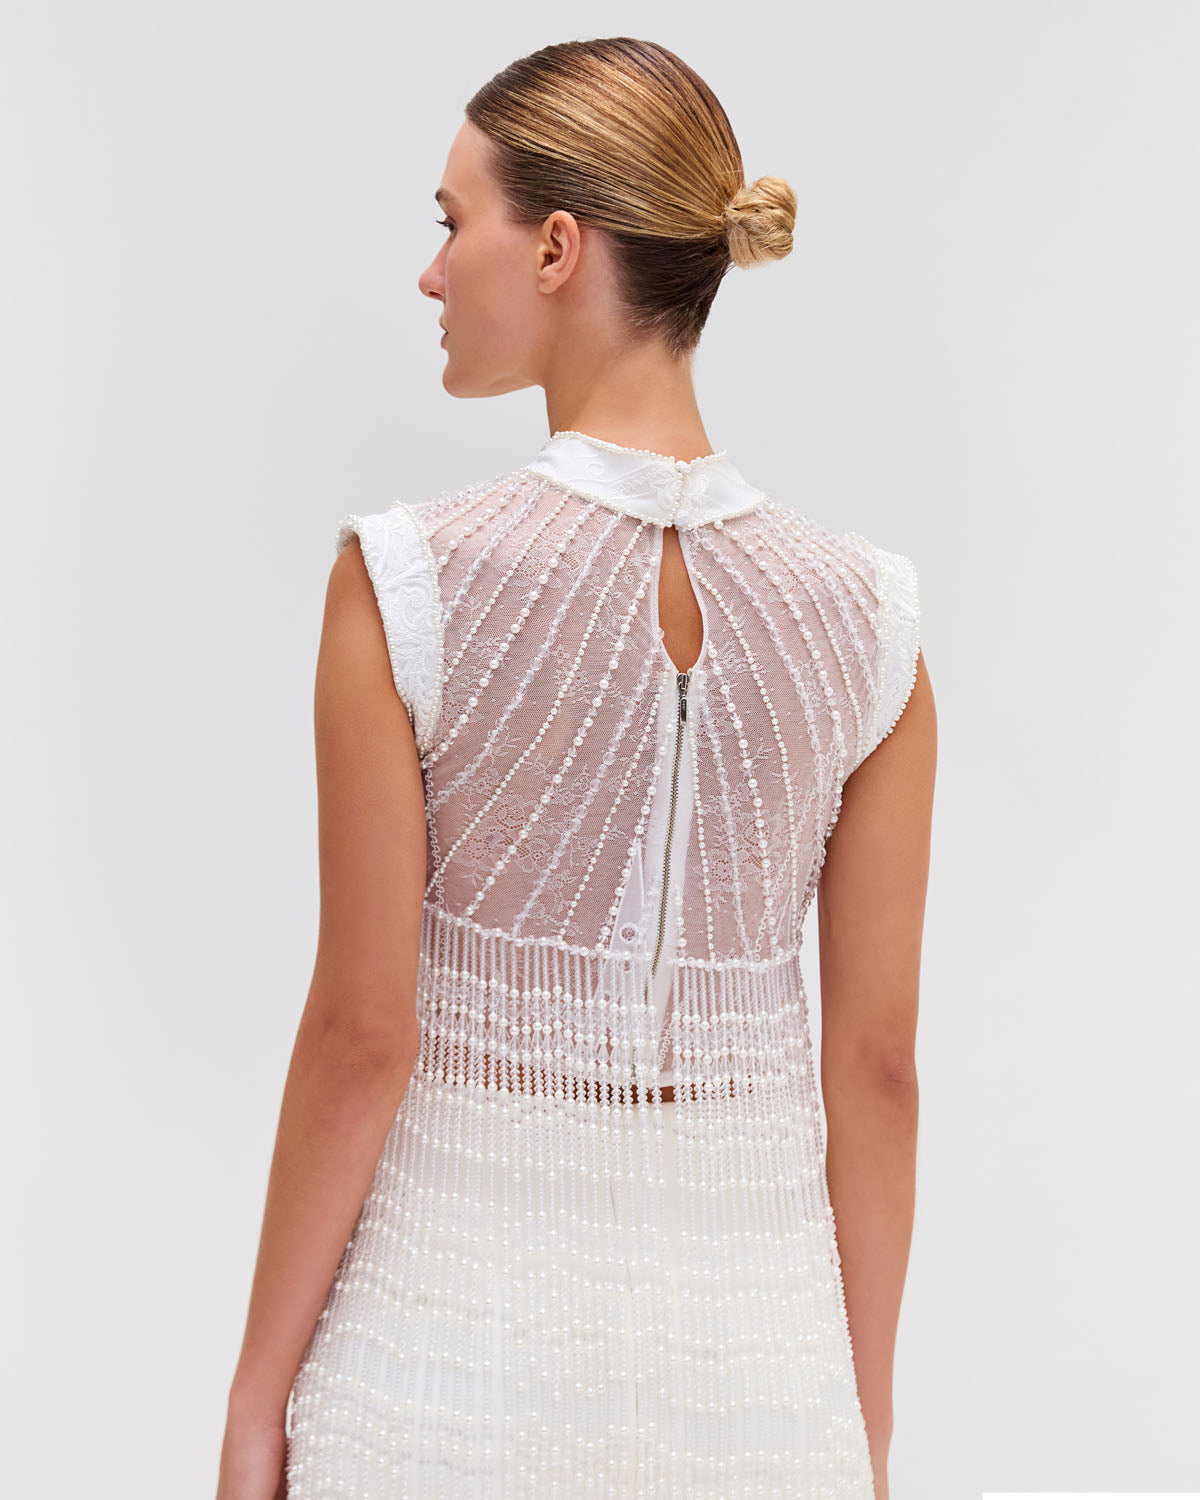 HAND-BEADED LACE TOP (EXCLUSIVE)